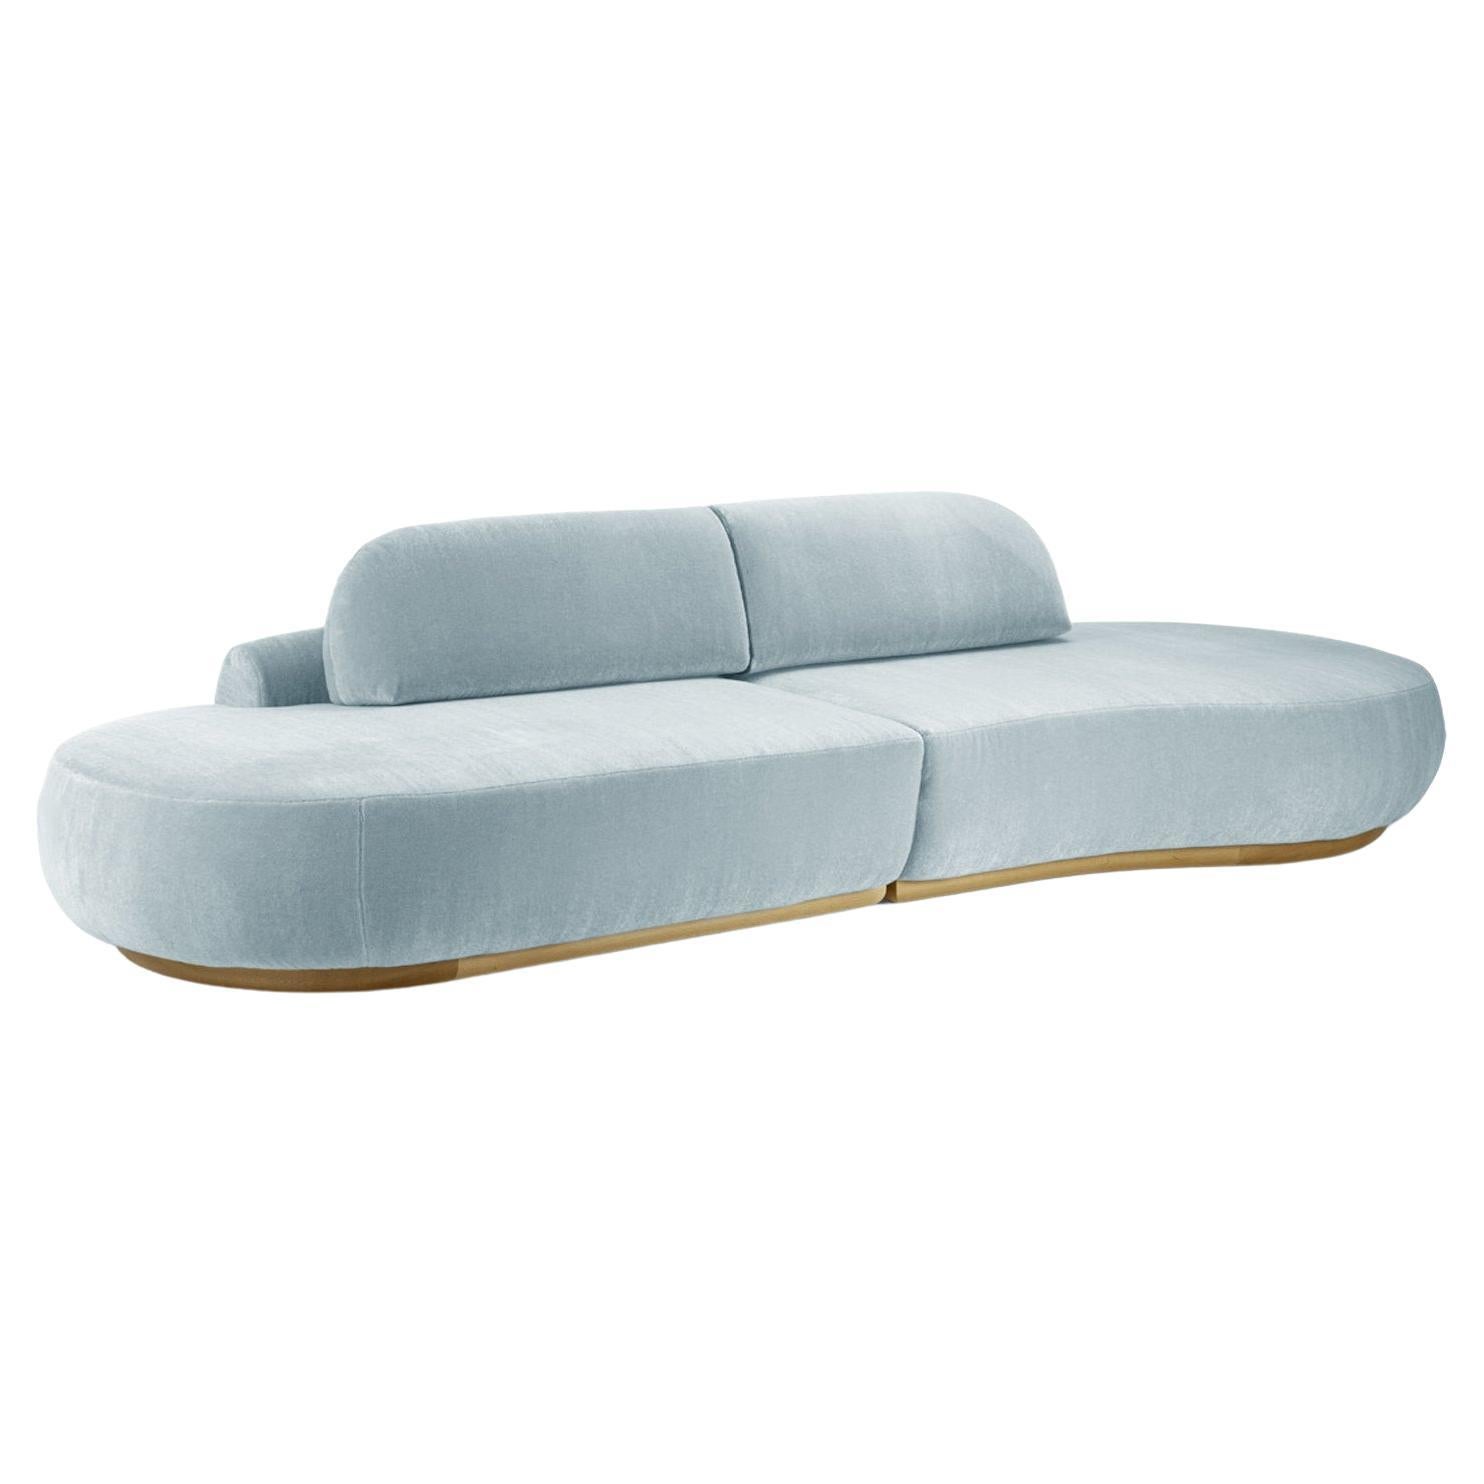 Naked Curved Sectional Sofa, 2 Piece with Natural Oak and Paris Safira For Sale